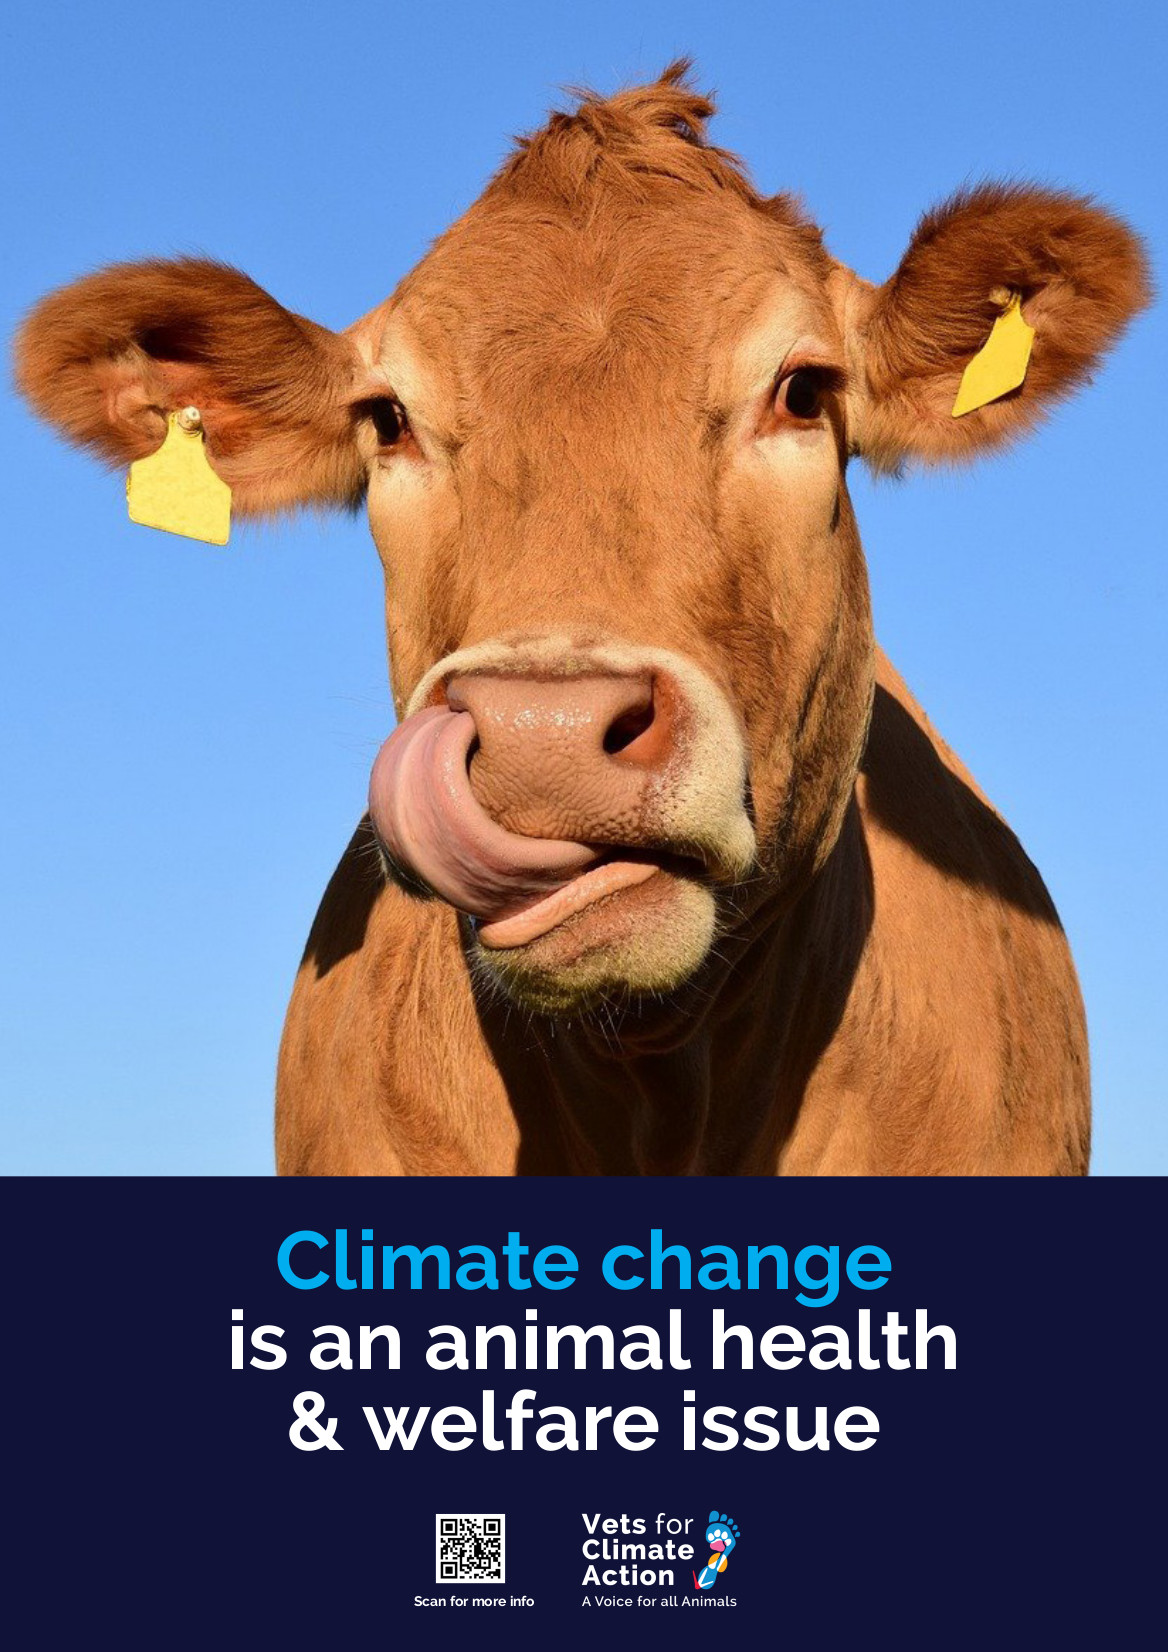 Veterinarians for Climate Action